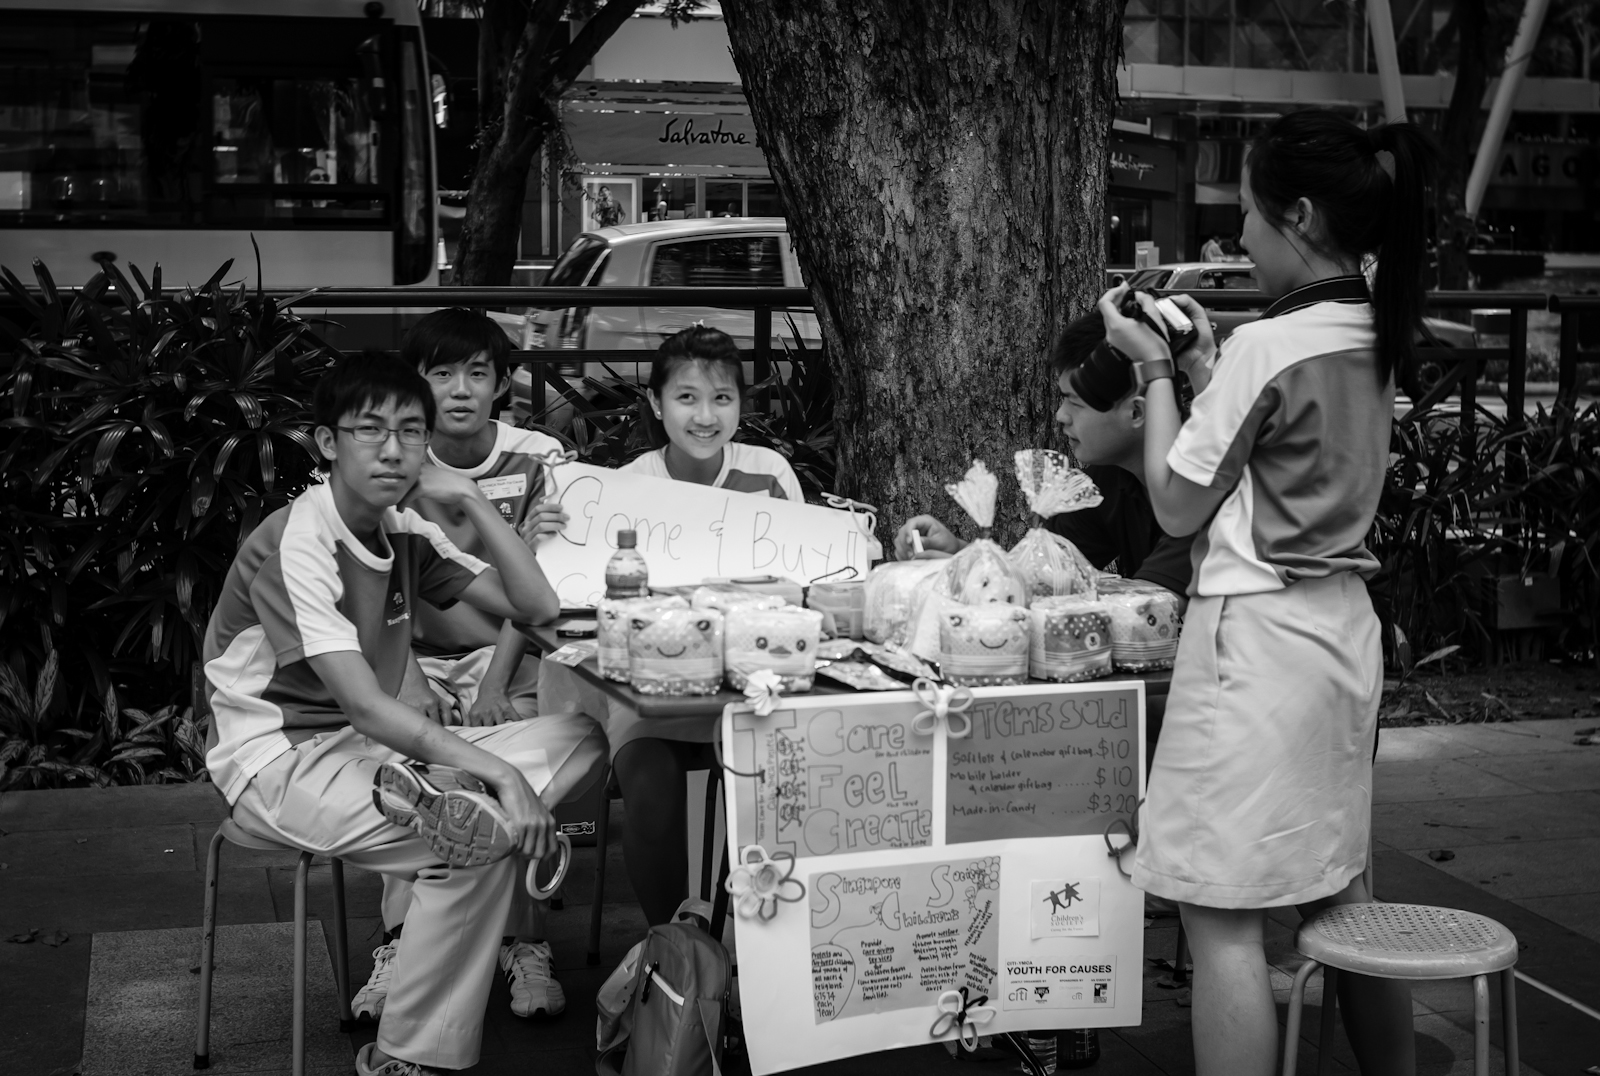 Street photography - charity drive in Orchard by Nanyang Junior College